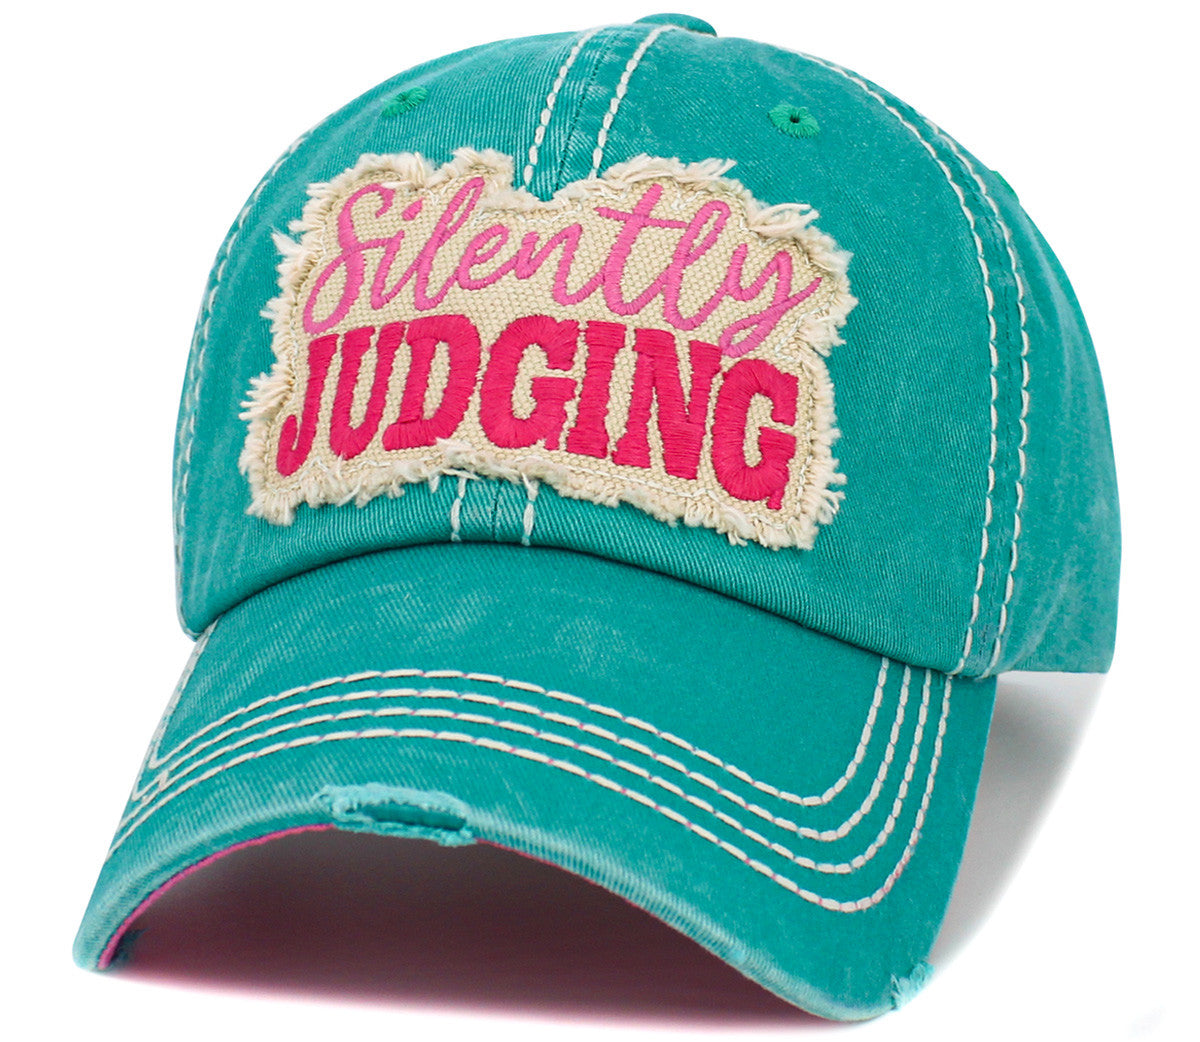 Silently JUDGING Hat